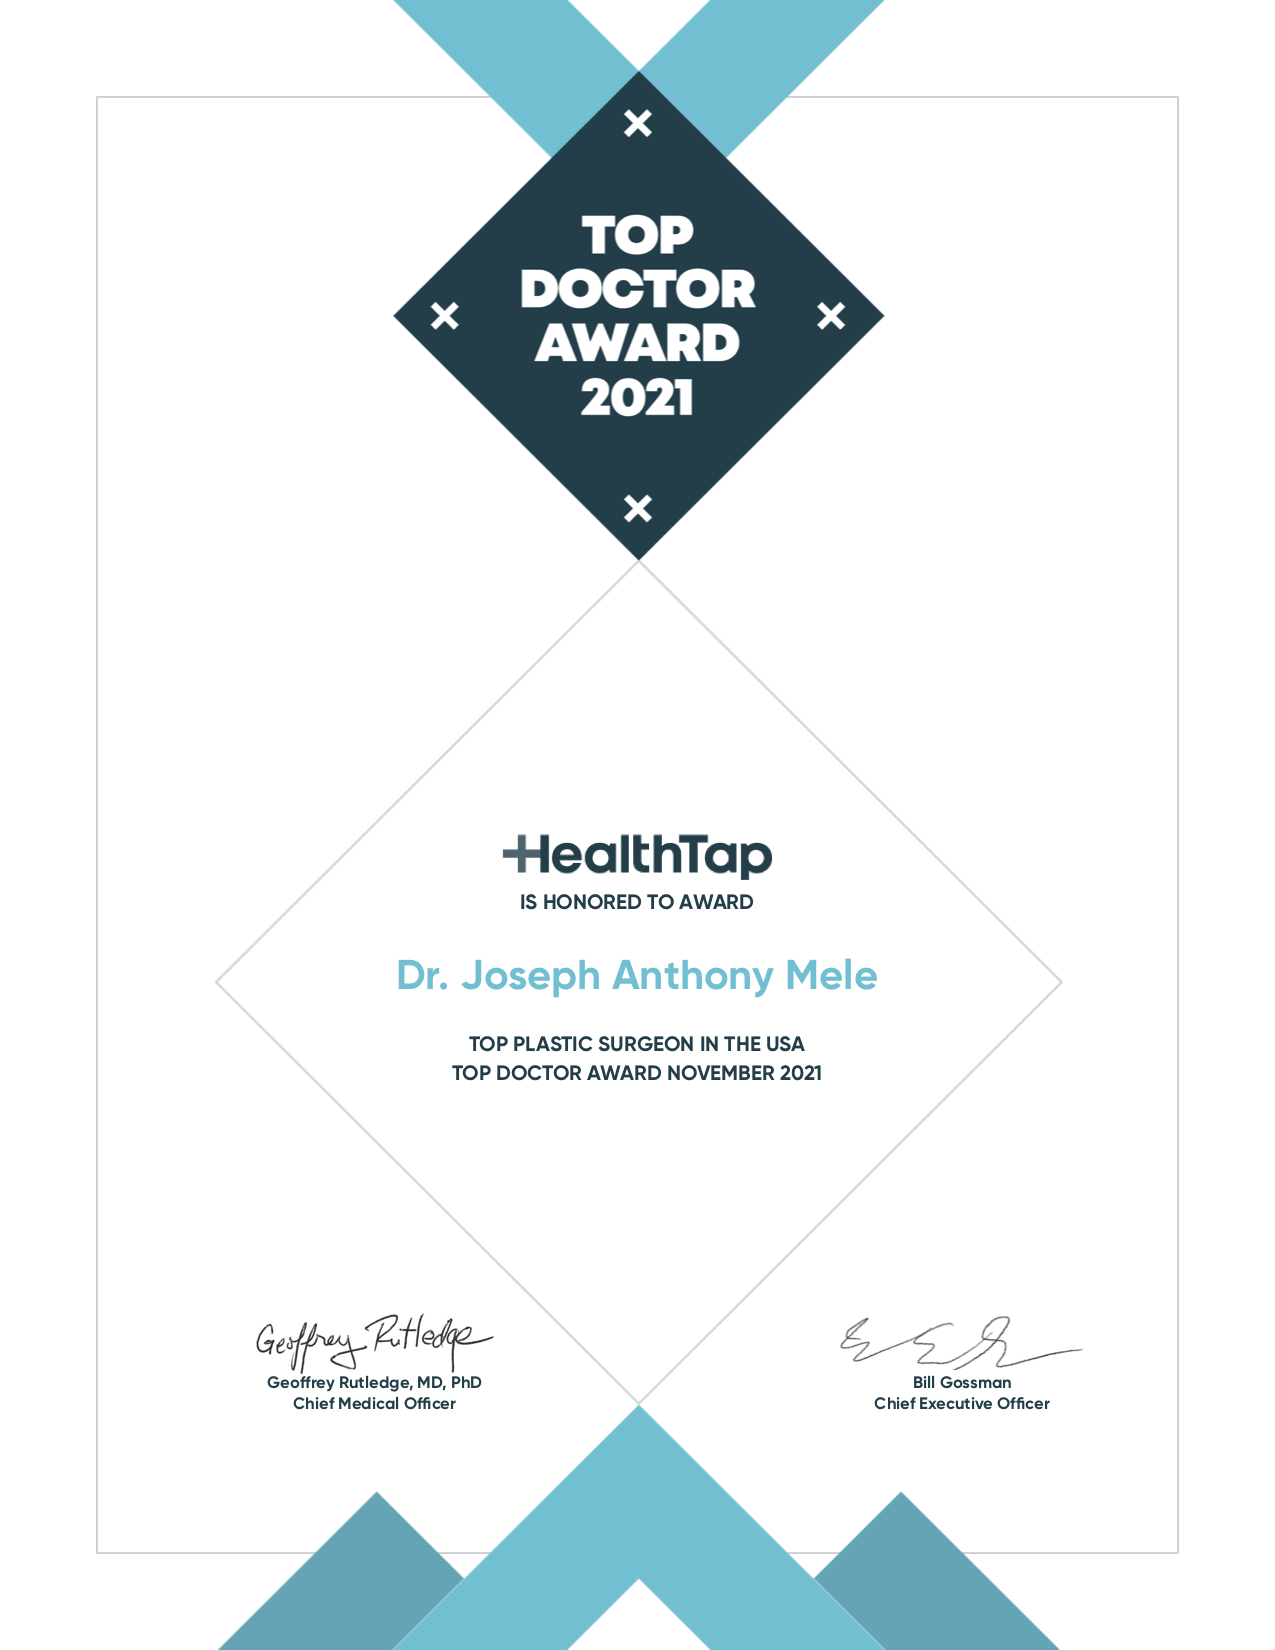 Dr. Joseph Mele Wins Top Doctor Award for Top Plastic Surgeon in the USA